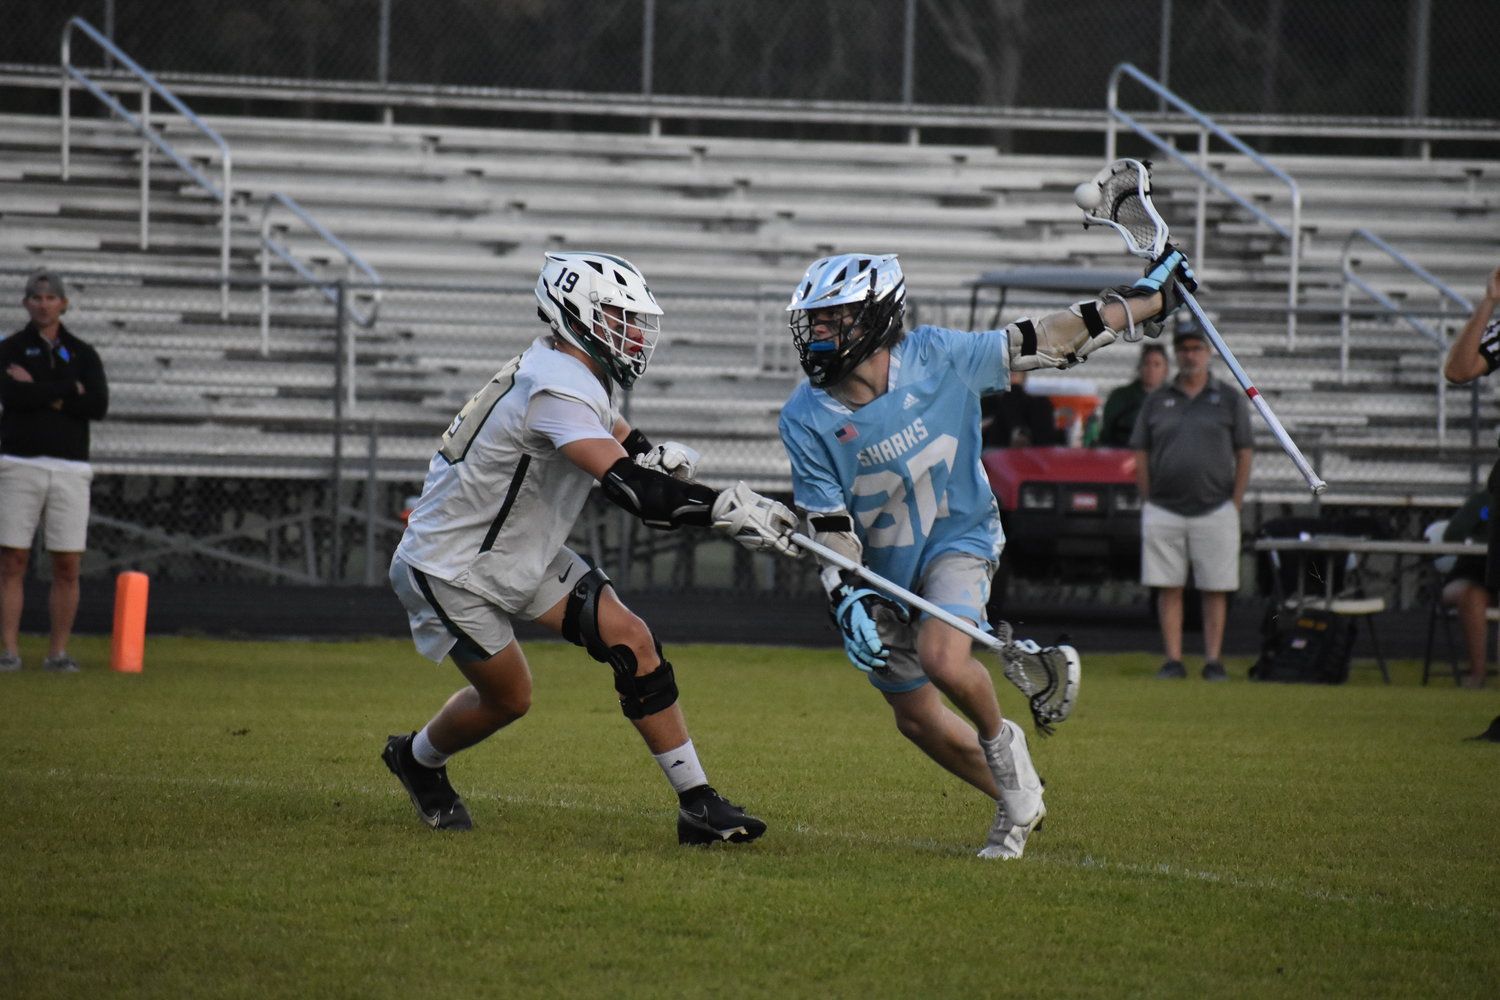 Ponte Vedra’s Maddox Johnson is pressured by Dylan Davis of Nease during a March 22 matchup between the rivals.